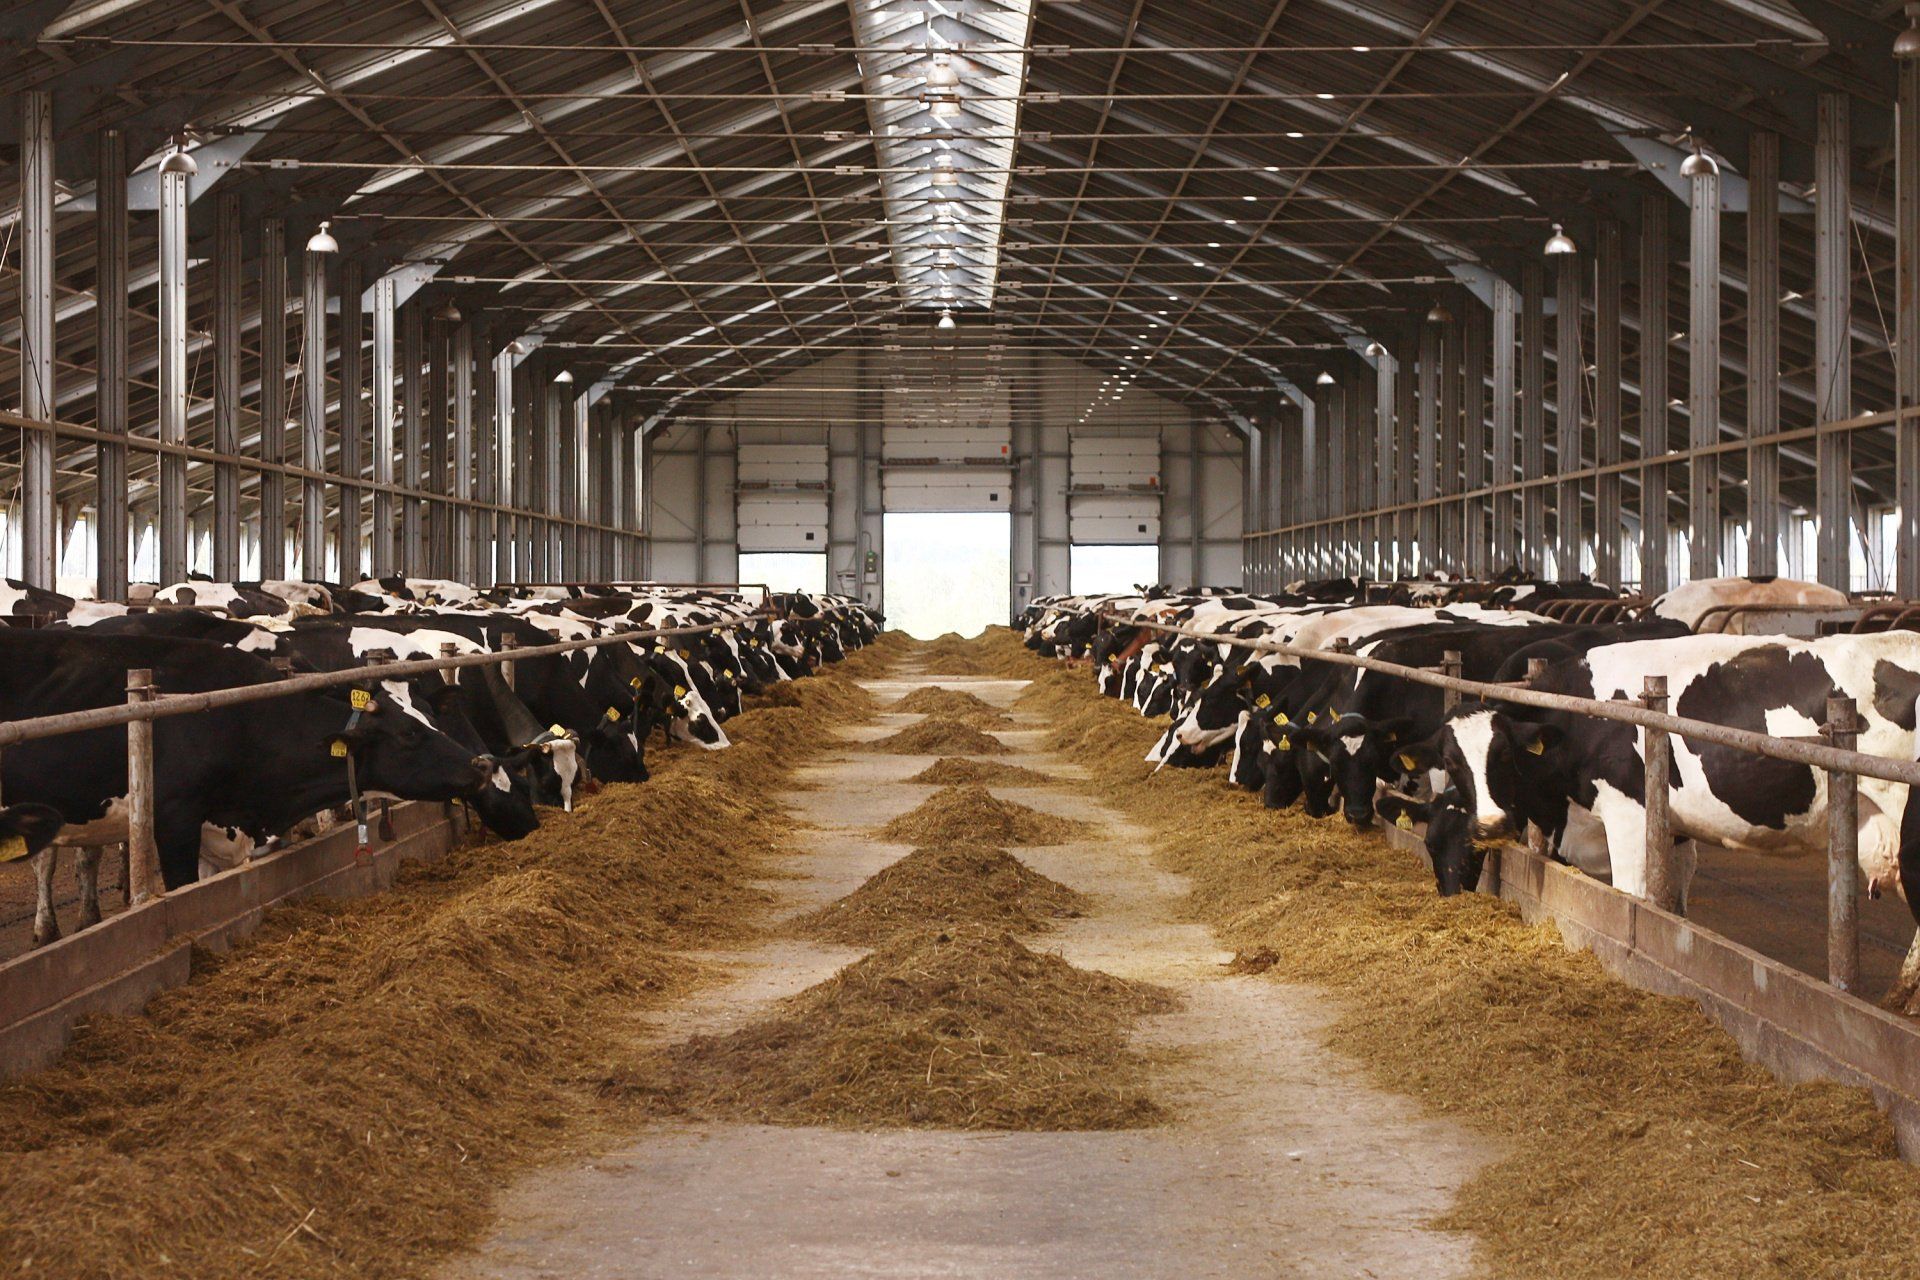 Cows in a barn